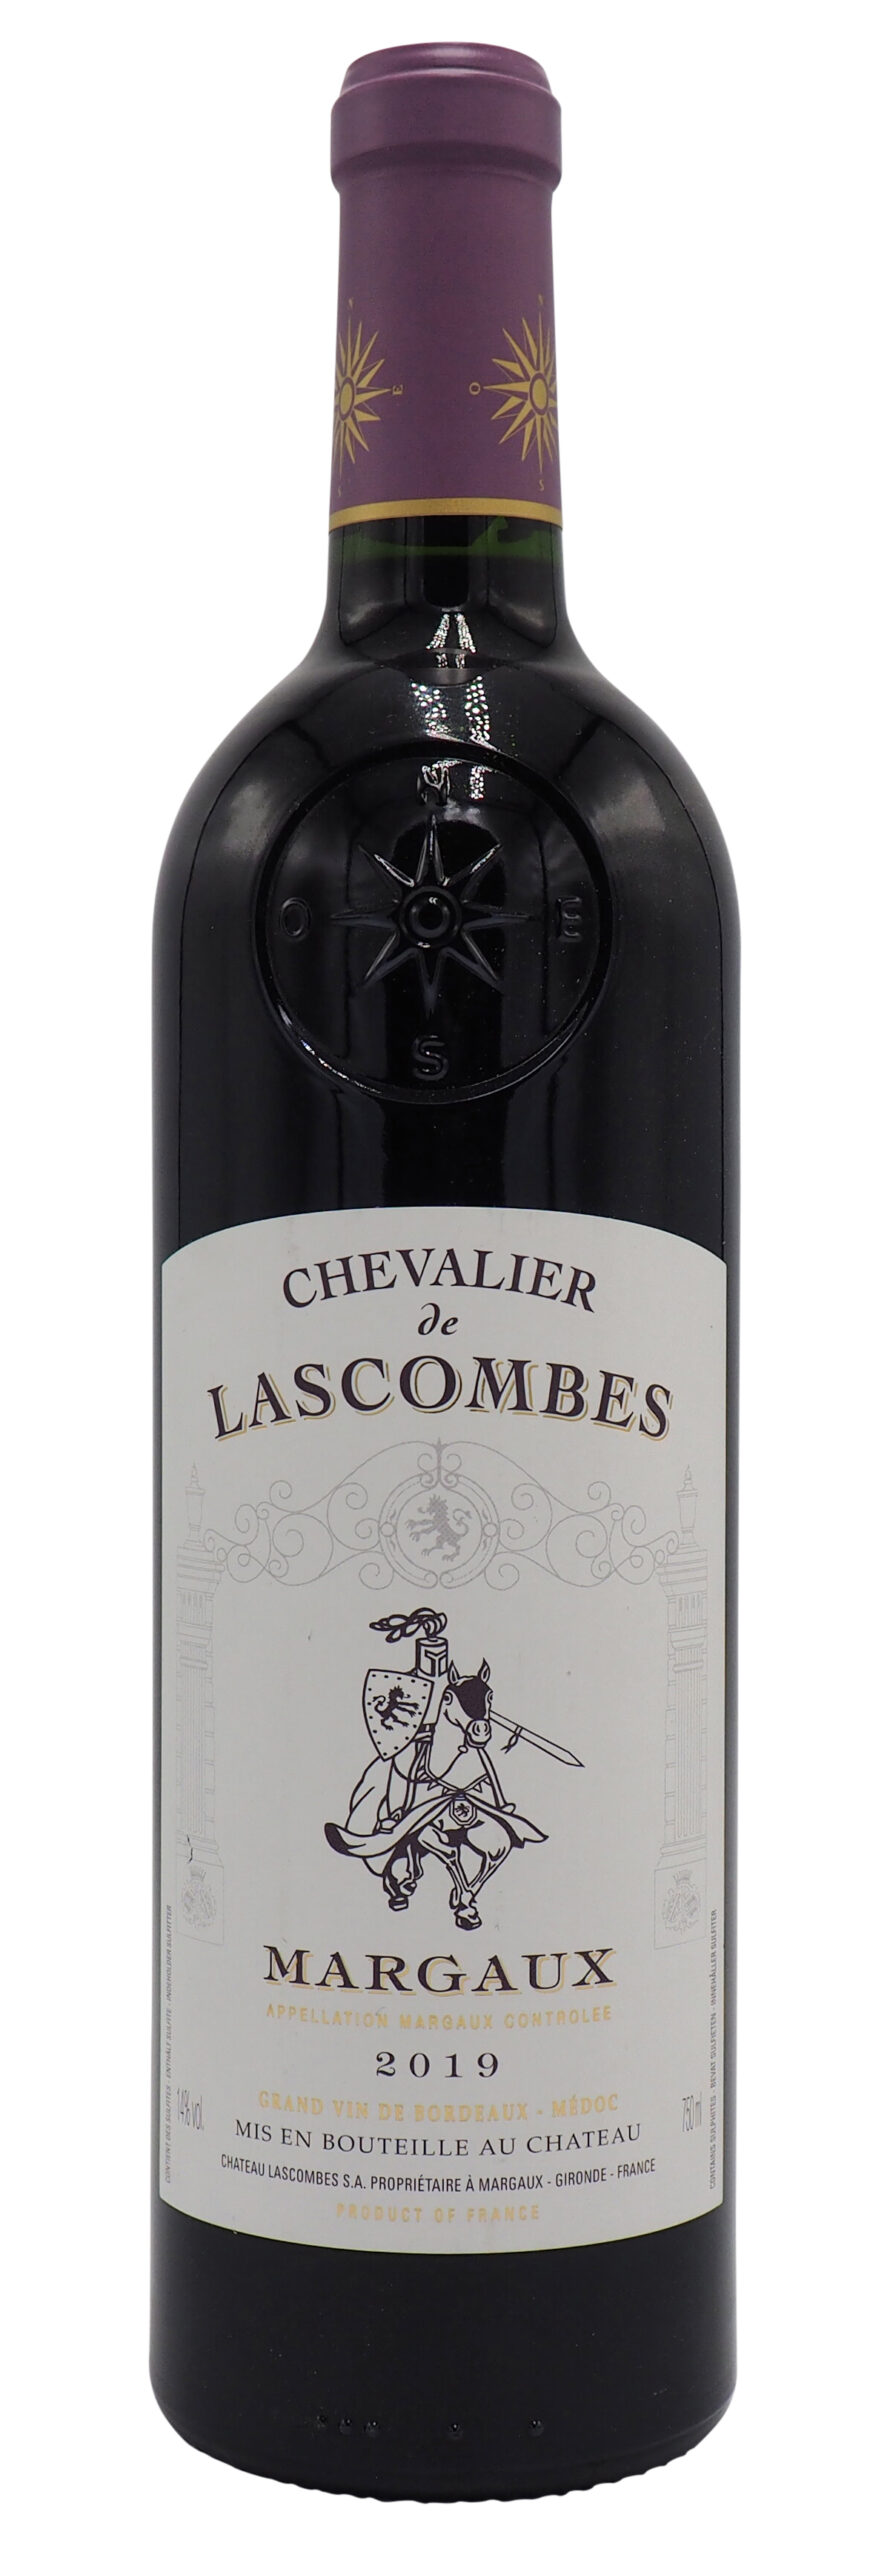 Chevalier Lascombes 2019 Margaux